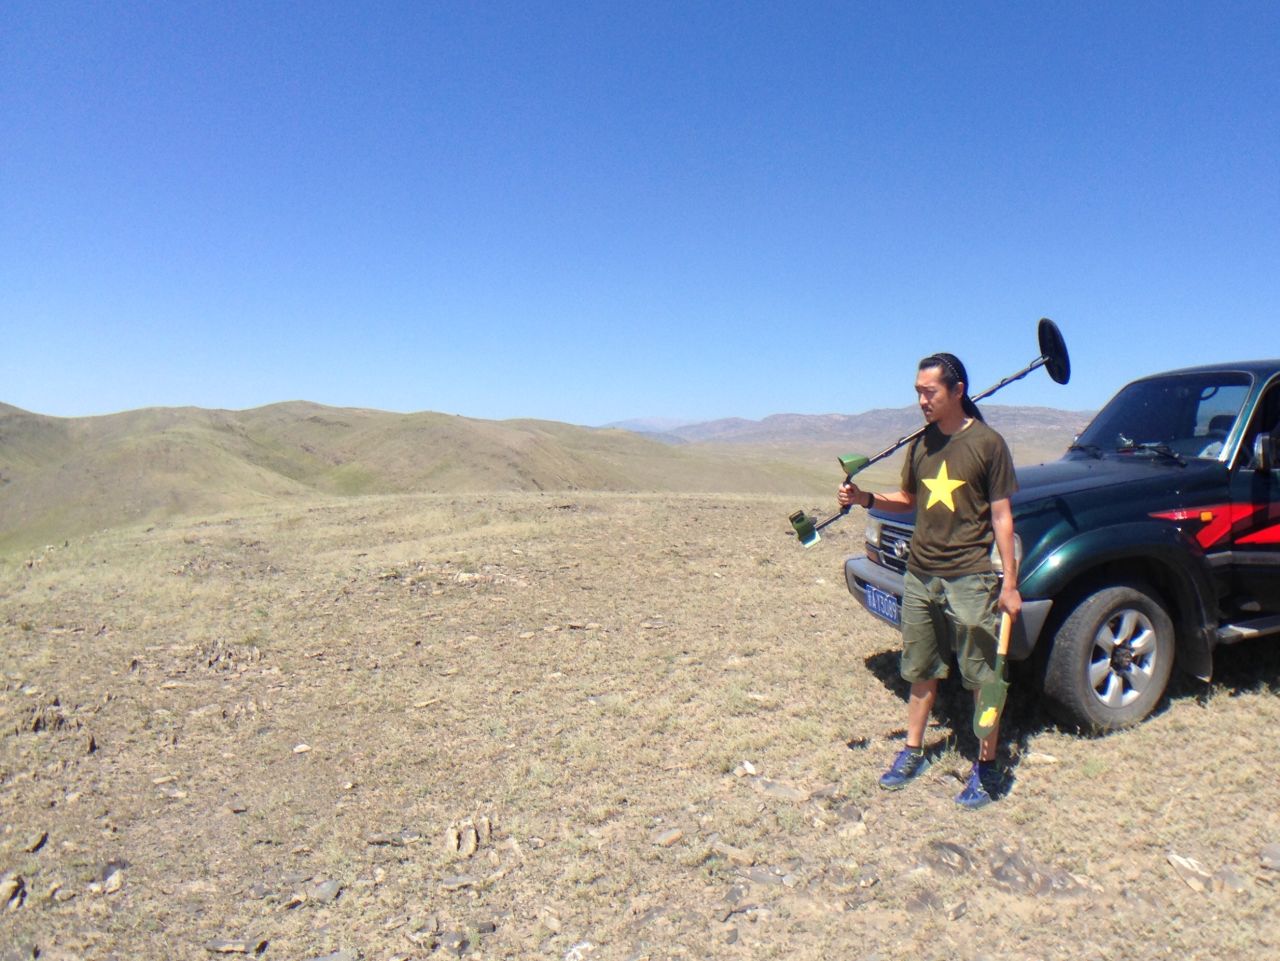 Zhang Bo on a hunt for meteorites in Xinjiang, China, in 2016